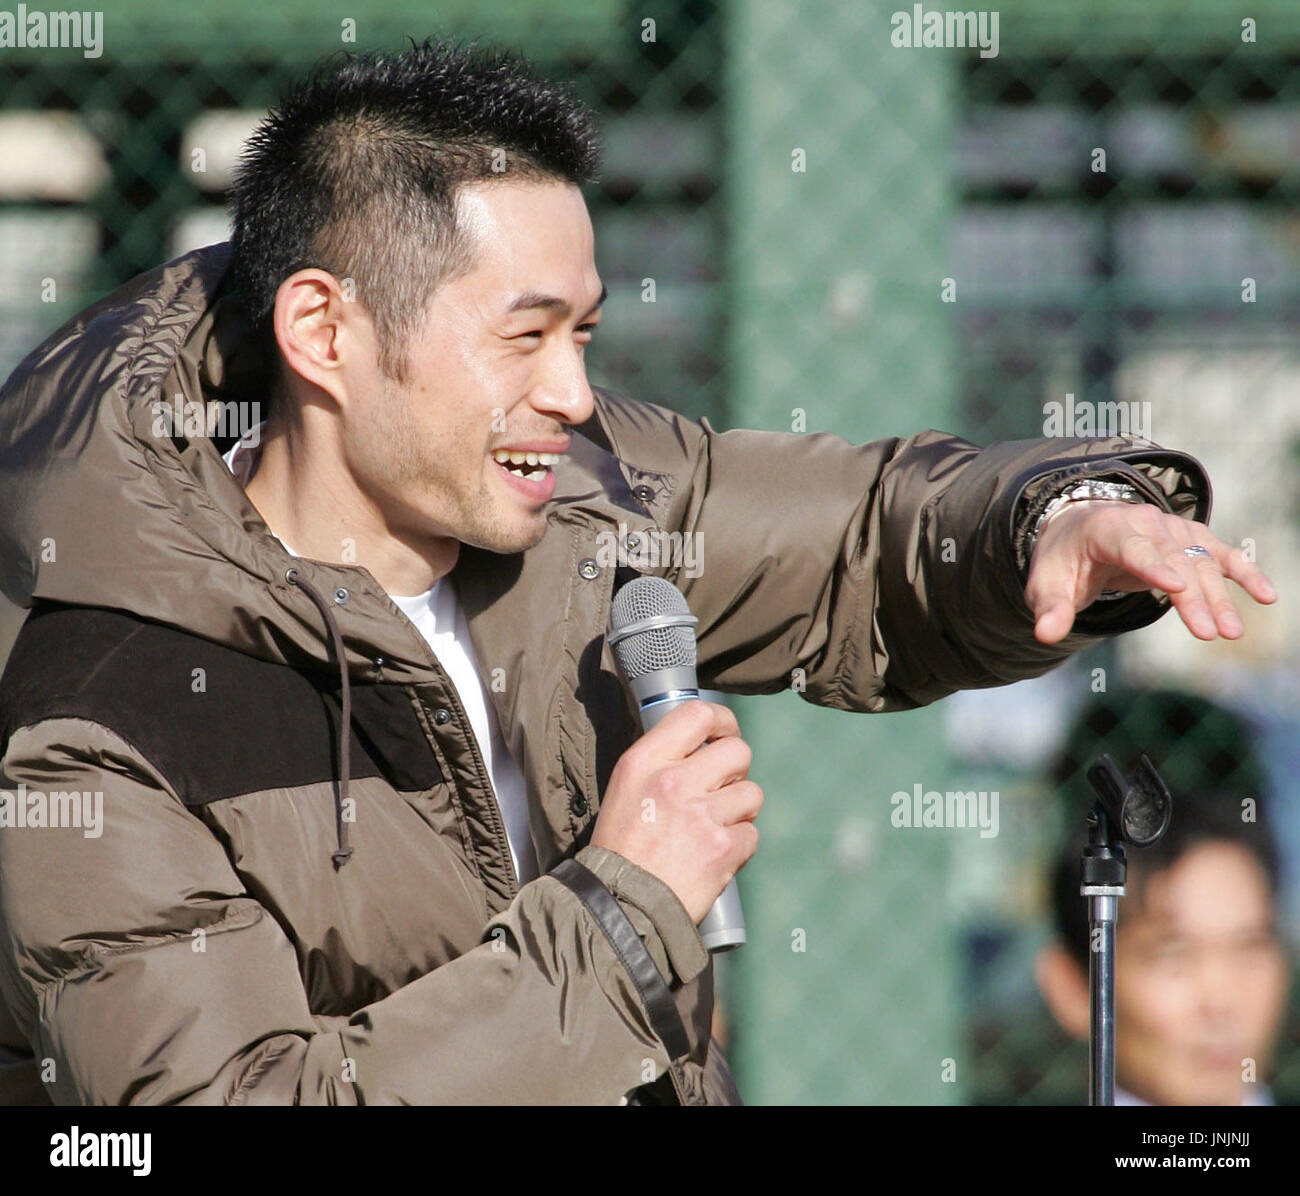 TOYOYAMA, Japan - Japanese major leaguer Ichiro Suzuki, now back in Japan,  speaks at an award ceremony for the Ichiro Cup baseball event for children  in his hometown of Toyoyama, Aichi Prefecture